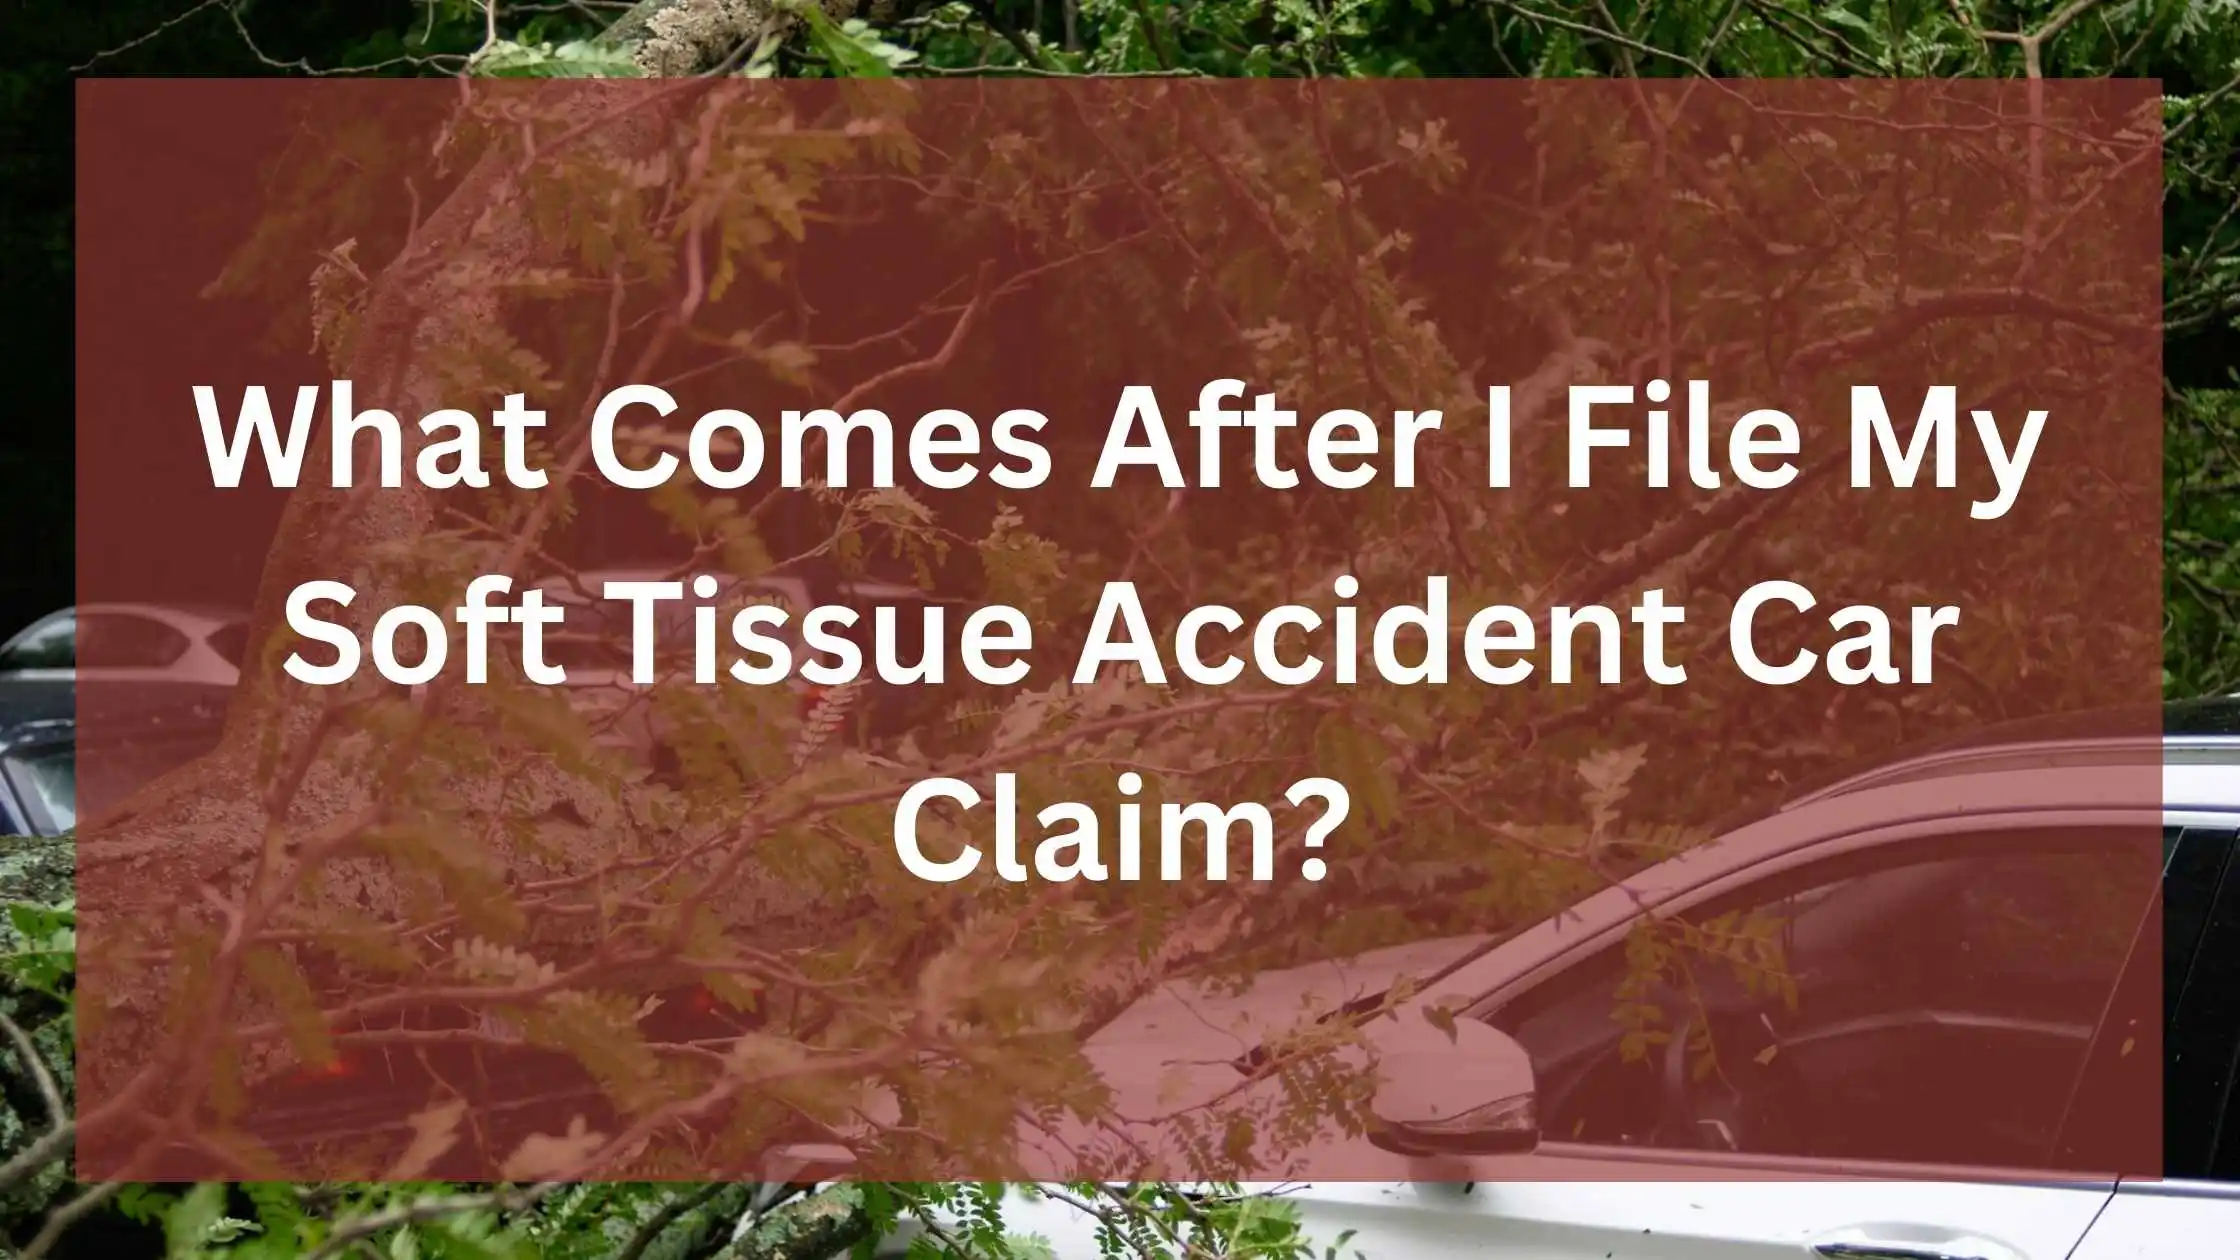 What Comes After I File My Soft Tissue Accident Car Claim